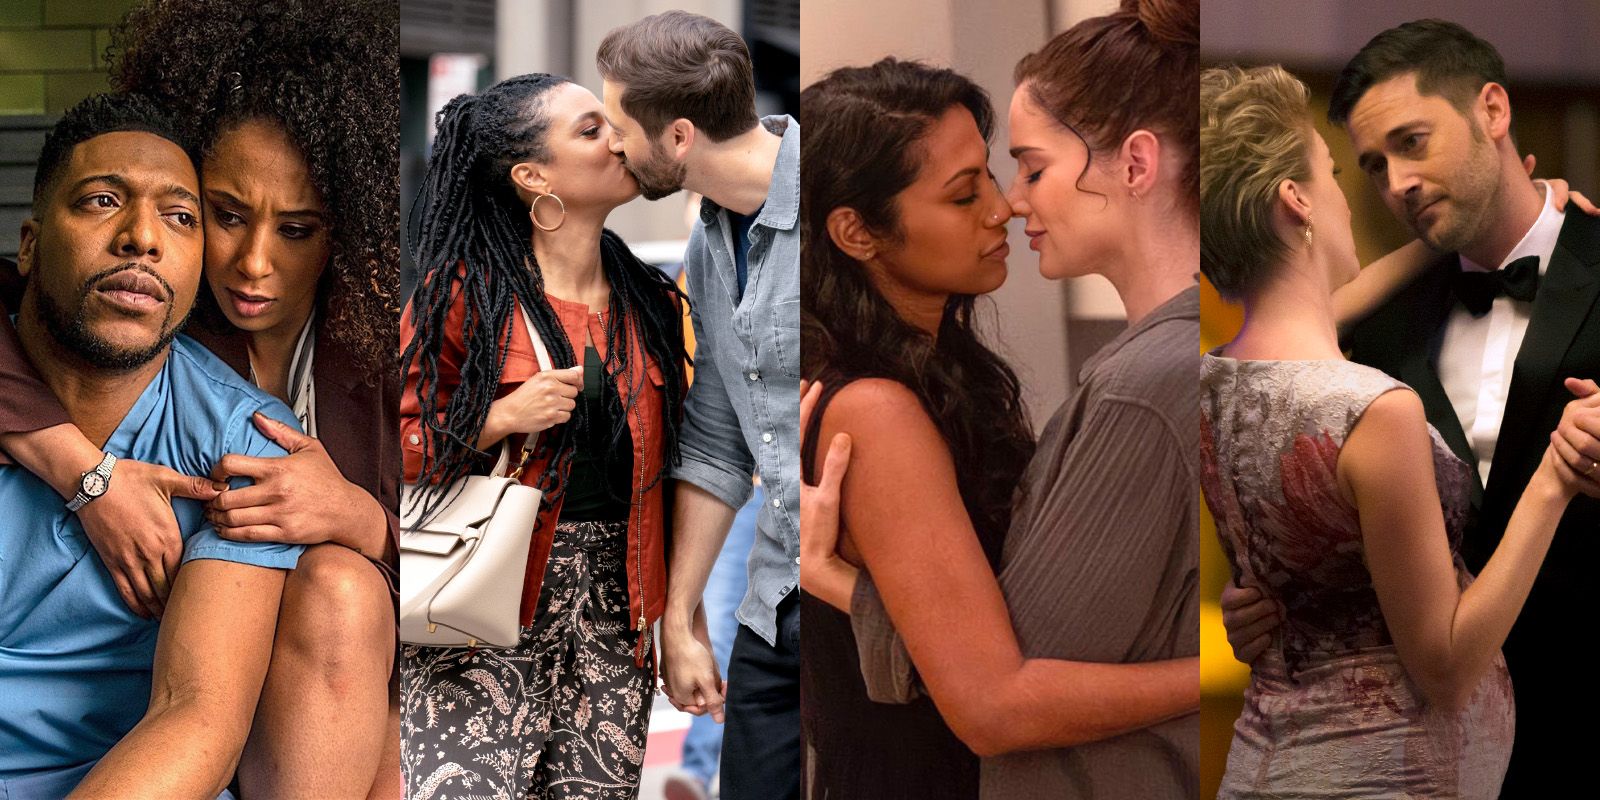 New Amsterdam Couples Ranked From Worst To Best